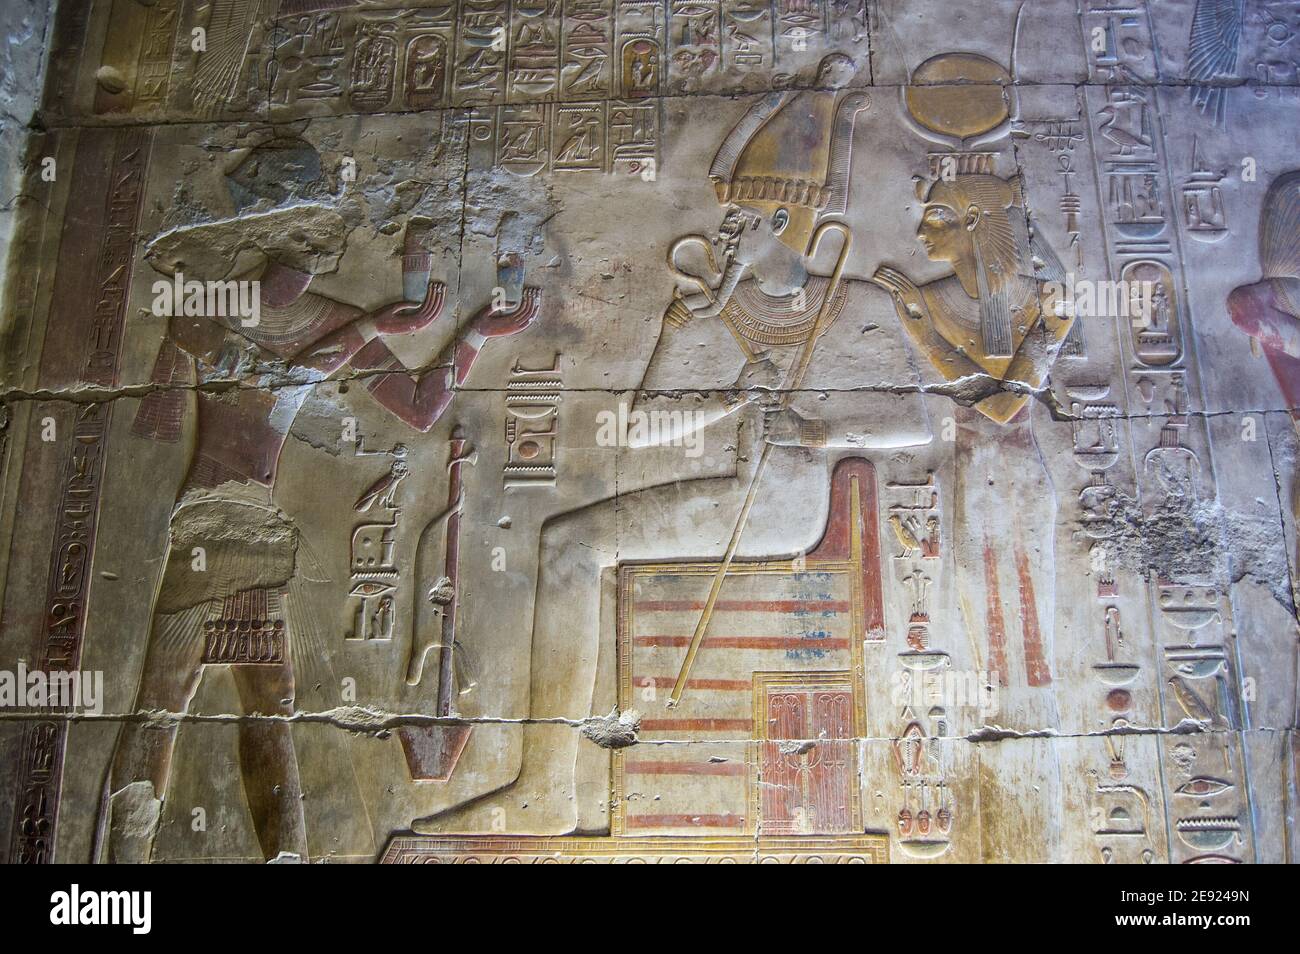 Heiroglyphic wall carving at Abydos Temple showing the Ancient Egyptian Pharaoh Seti I making an offering to the gods Osiris and Hathor. Stock Photo